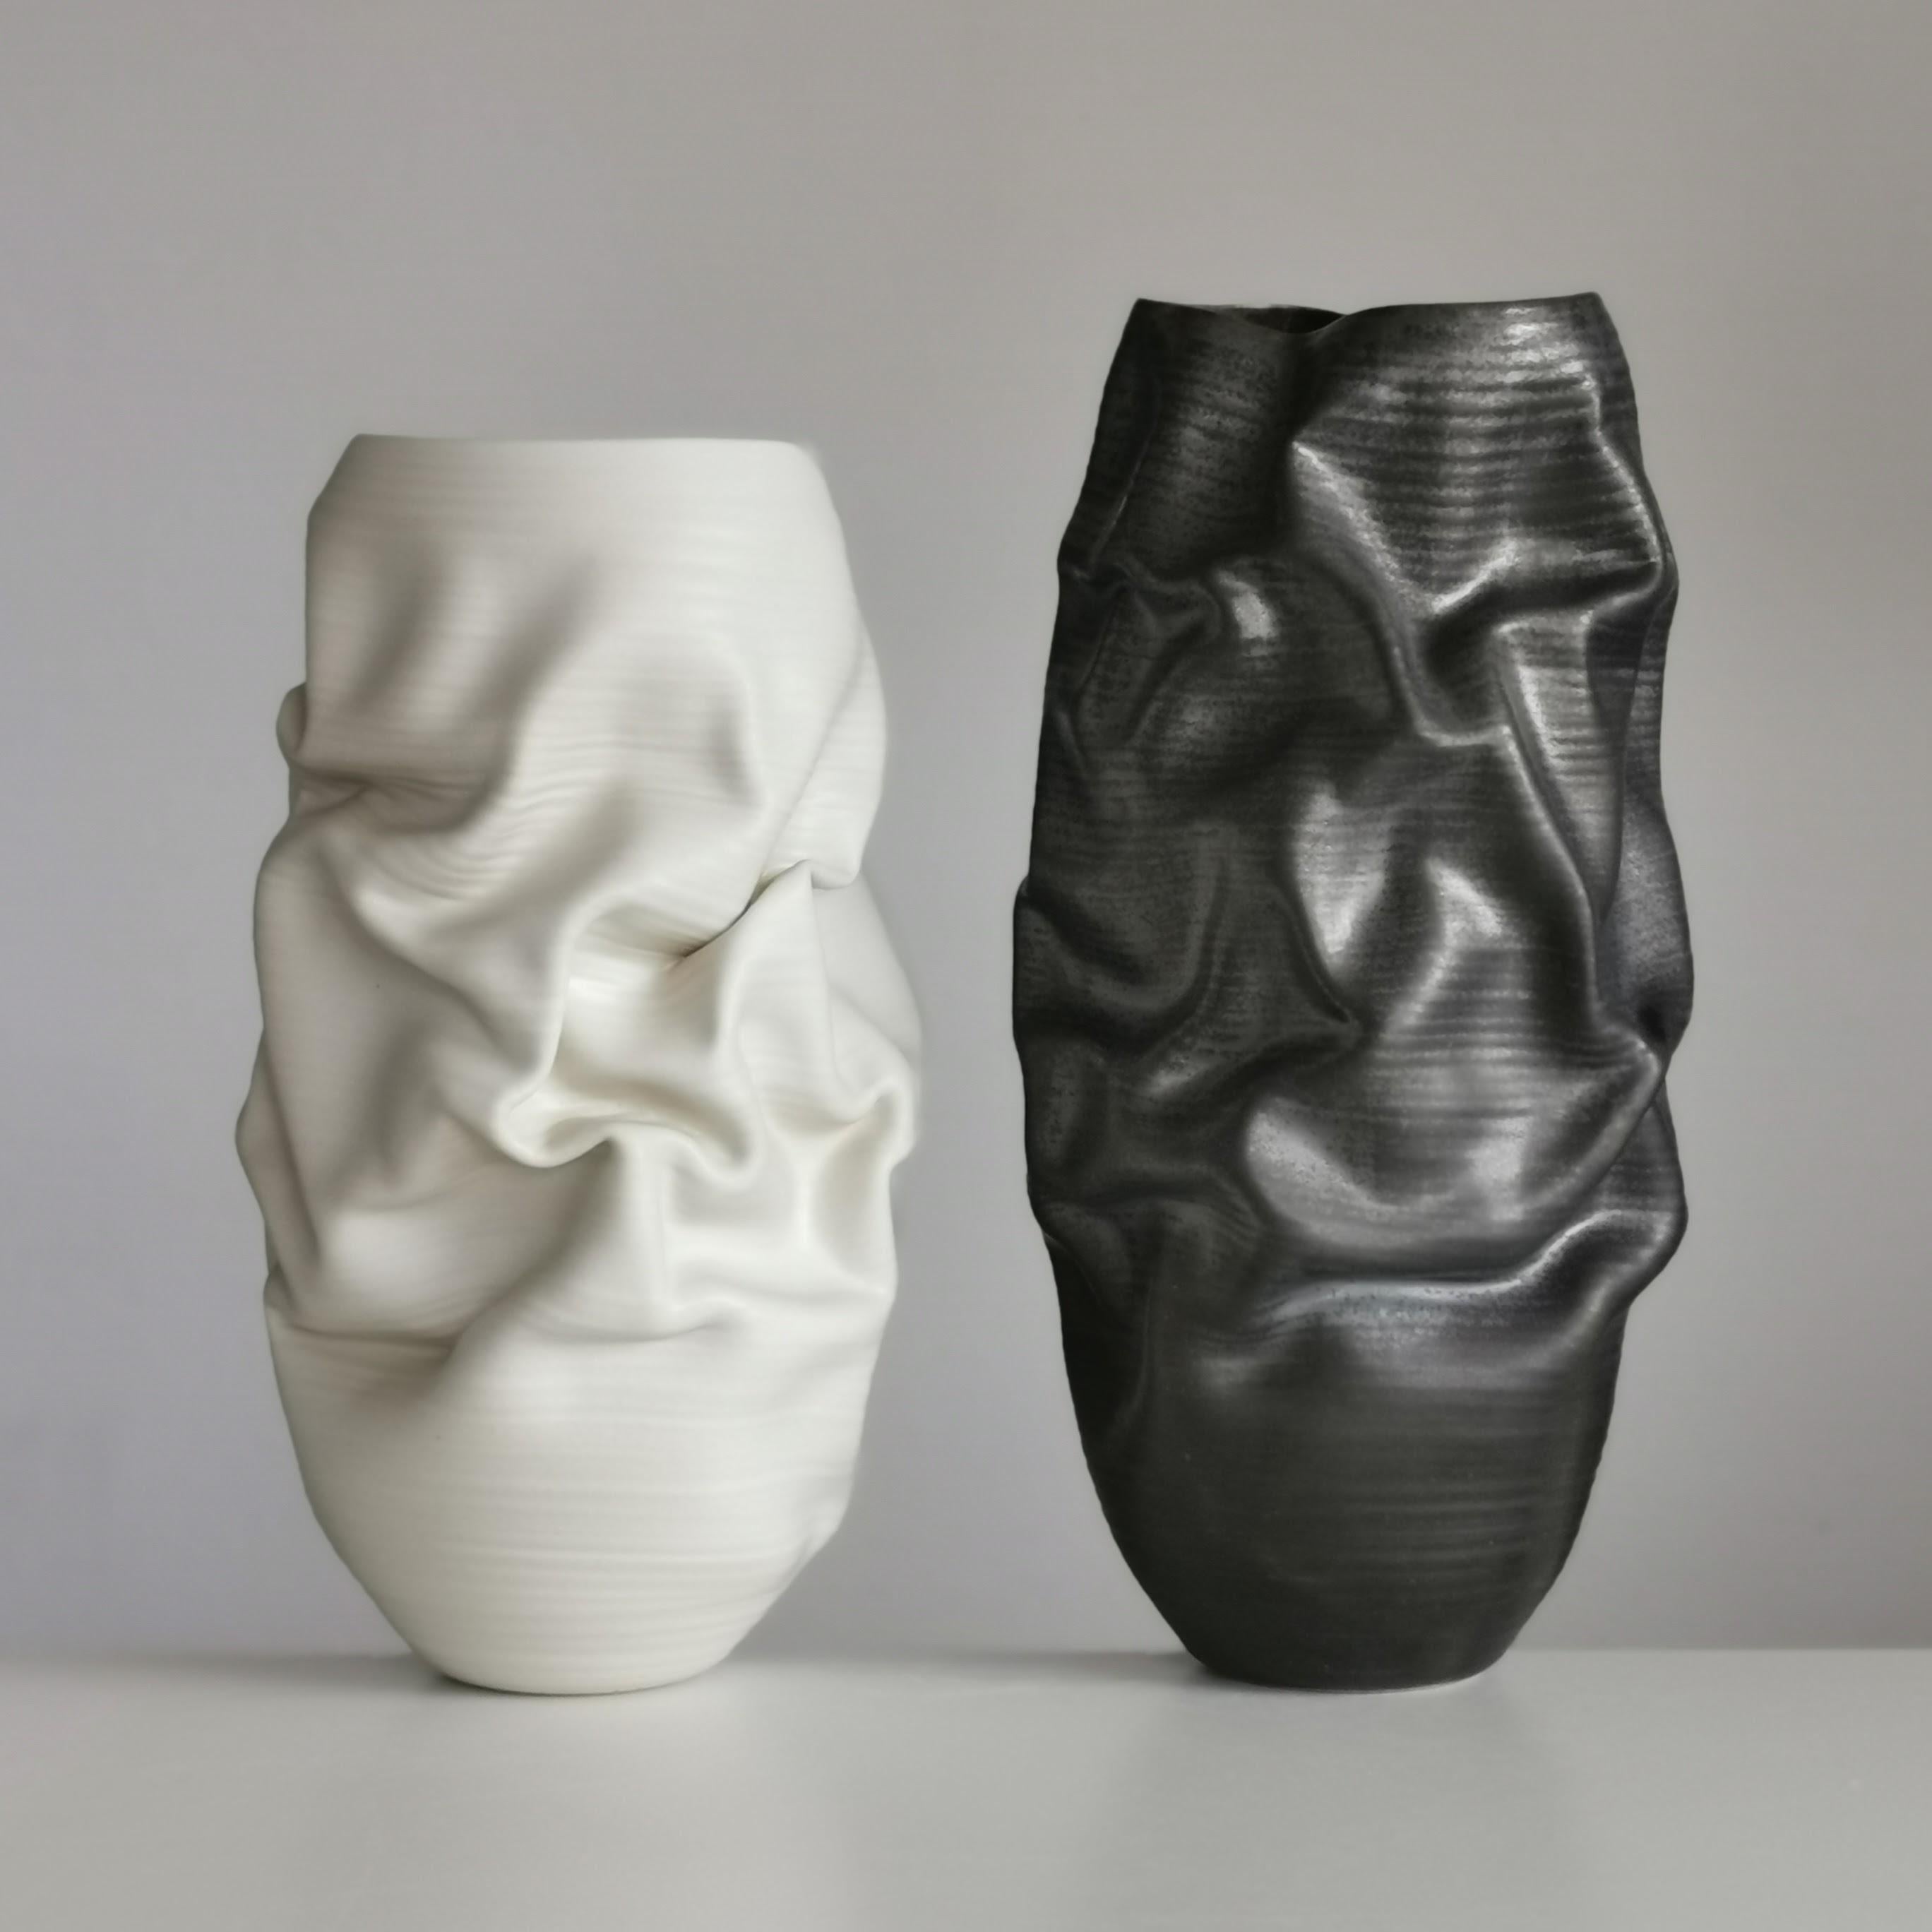 New ceramic vessels from ceramic artist Nicholas Arroyave-Portela. 'Water Spirits' pieces (n.65 and n.64) are sold as a pair.

No. 65 tall white crumpled form (Vessel, Interior sculpture, not suitable for holding water)
White St.Thomas clay,